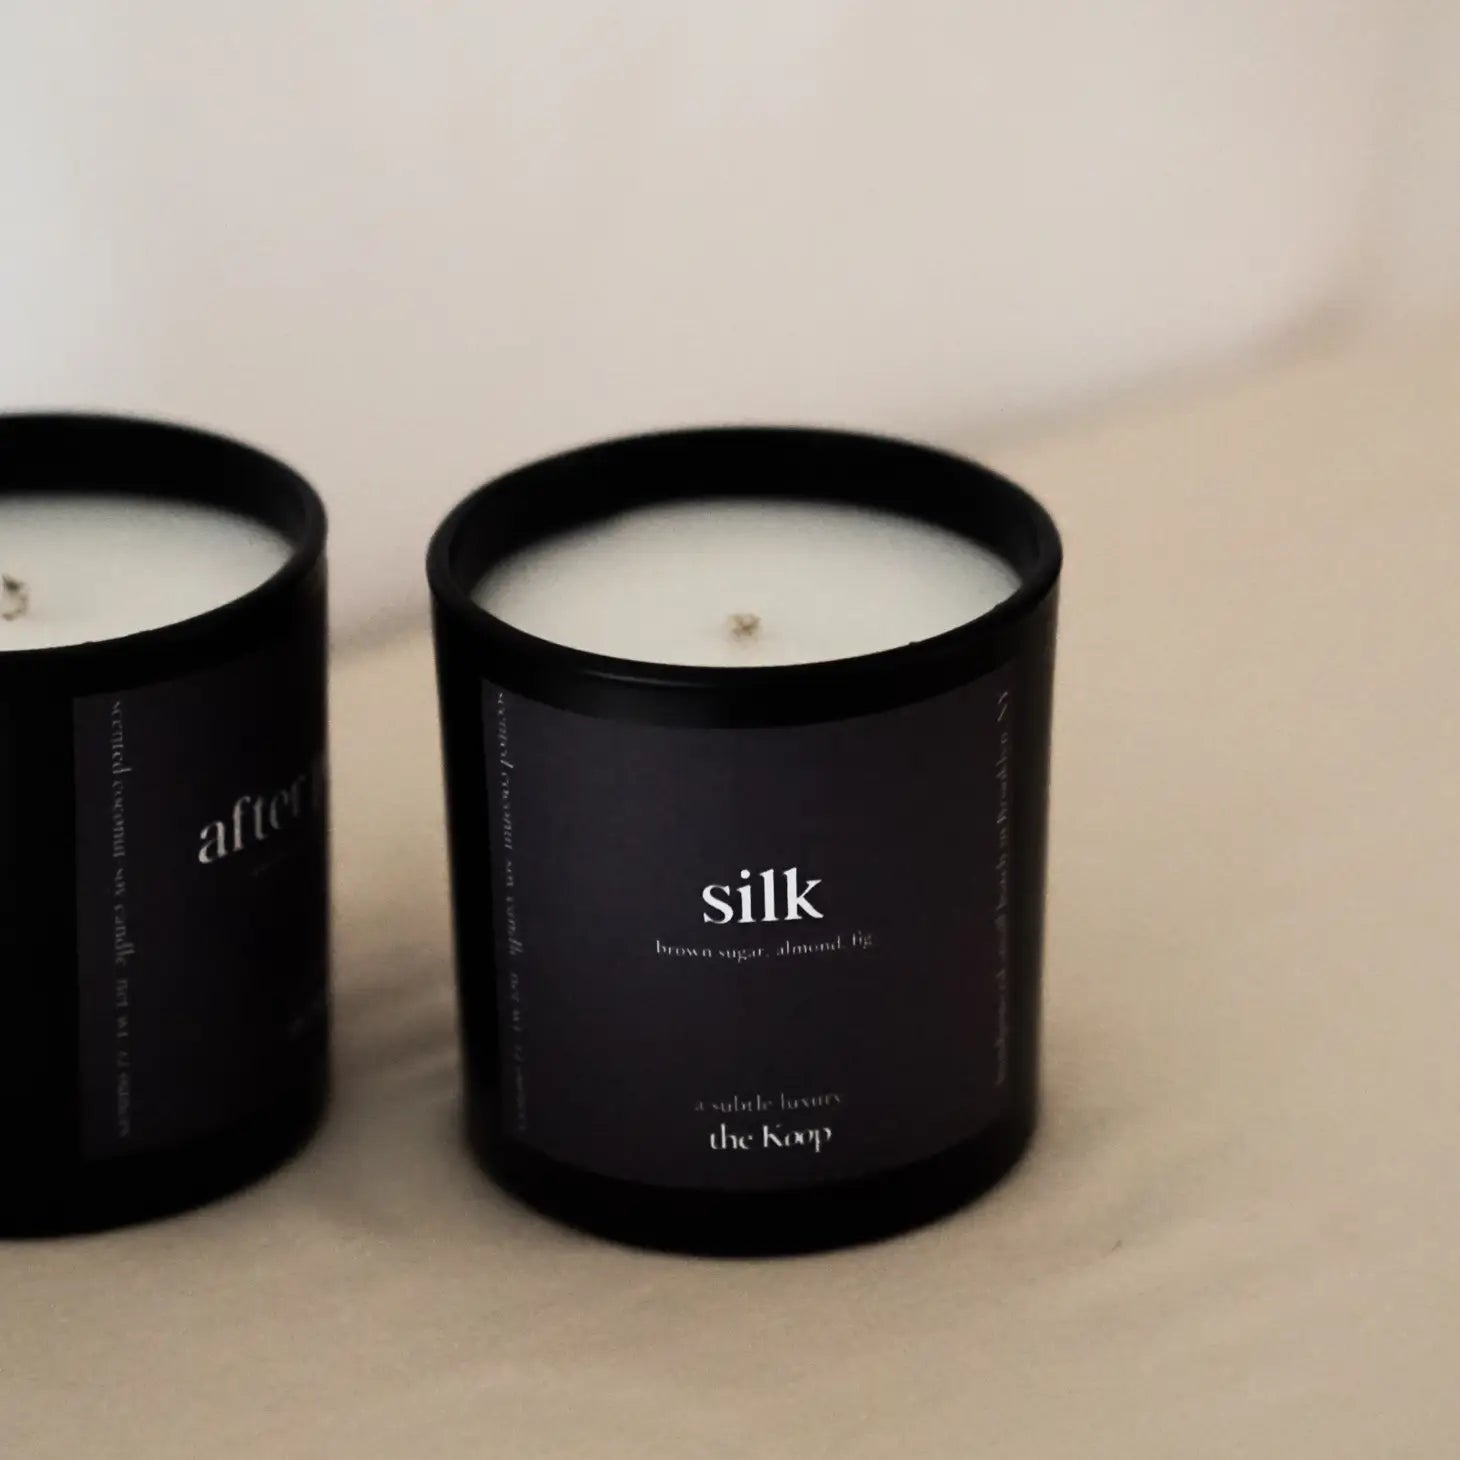 Silk Scented Candle - Koop NYC